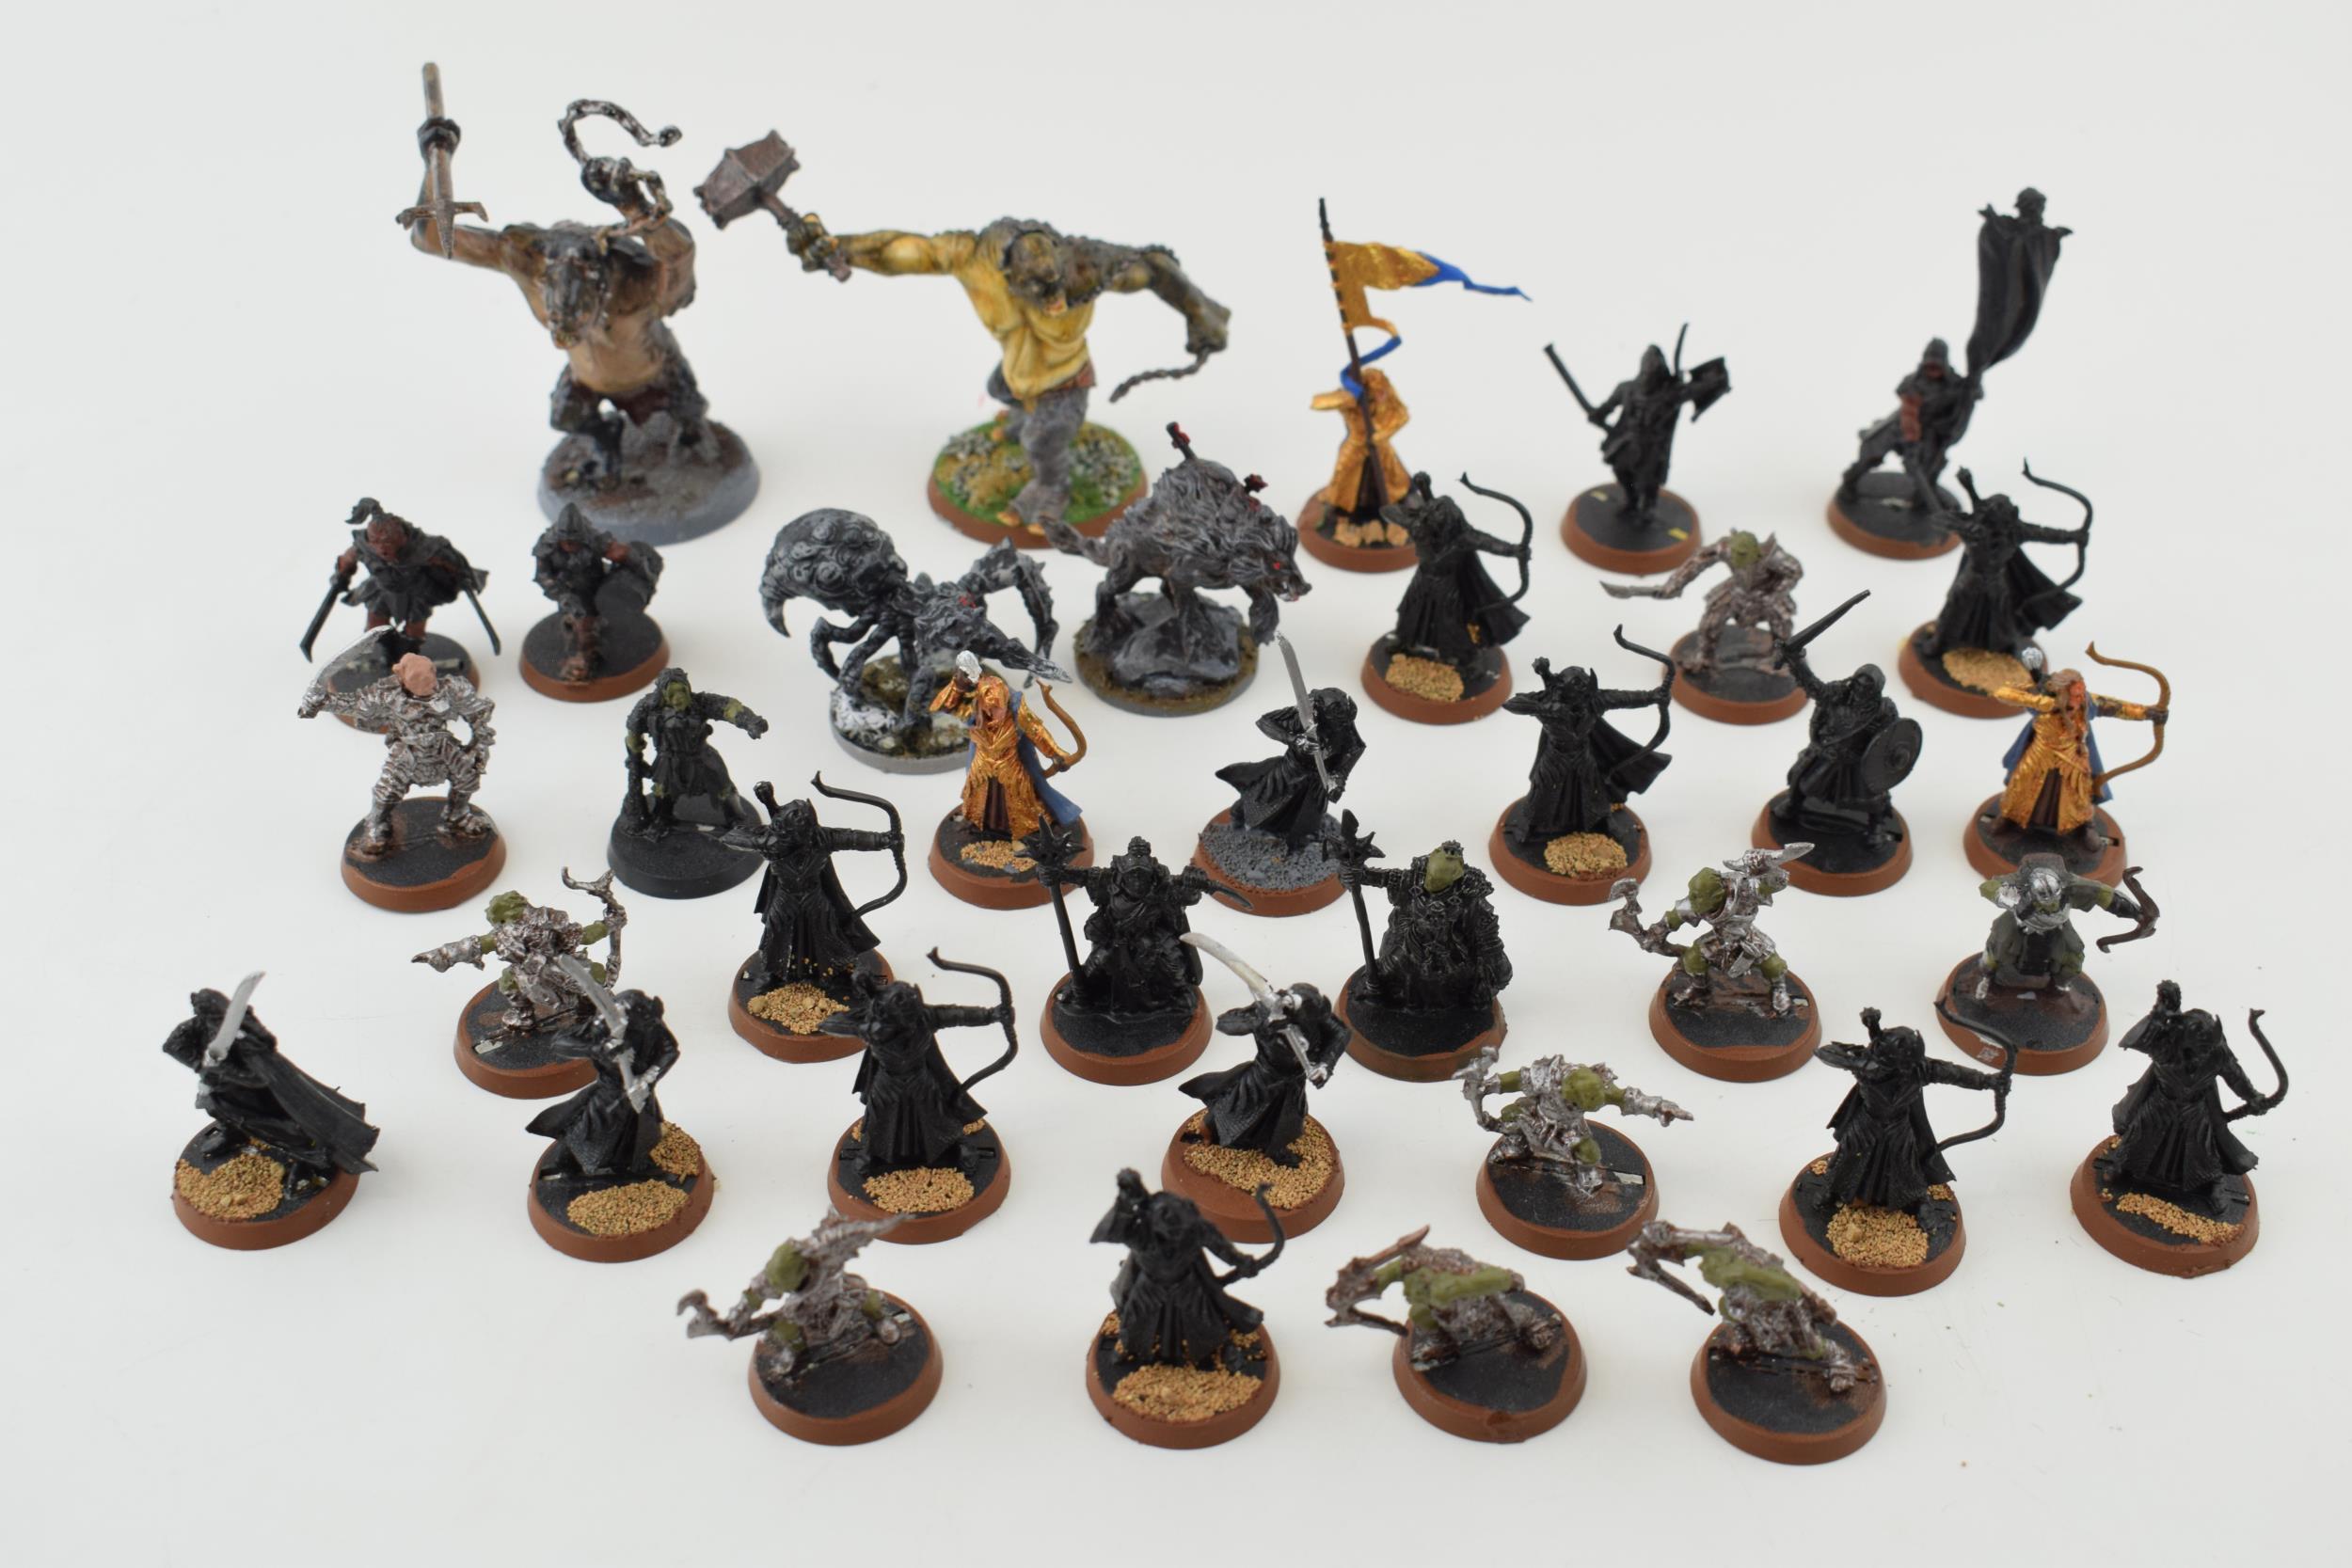 A collection of cast metal war-games and miniature figures by 'Games Workshop' from the 'Lord of The